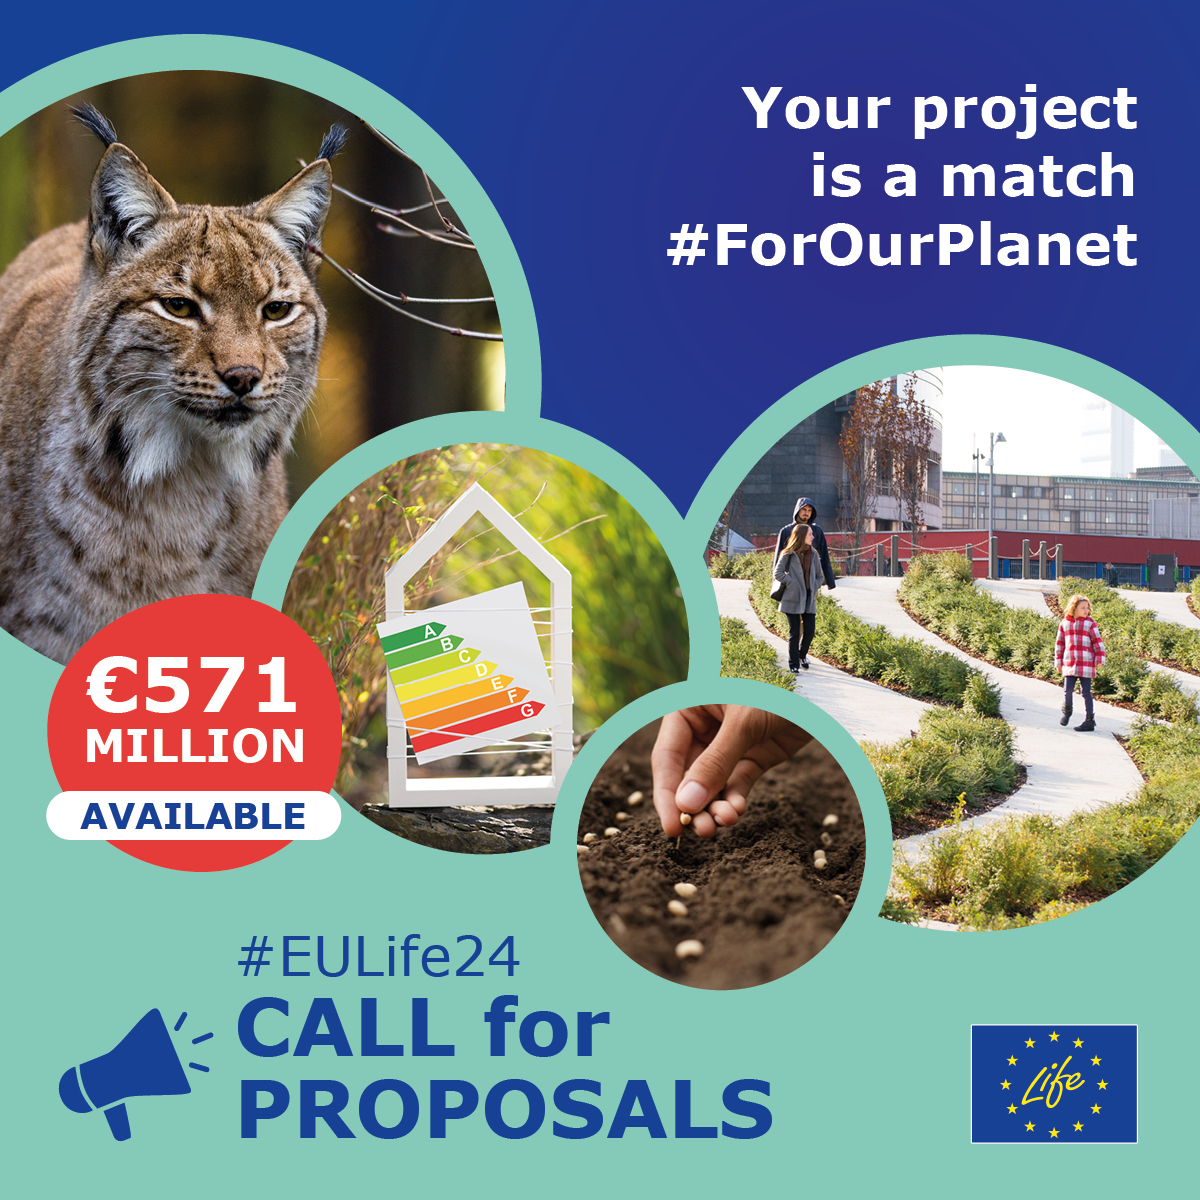 Do you know that €571 million are now available for #LIFEproject proposals? The new #EULife24 call is focusing on: 🐋Nature protection 🌍Circular economy ⛈️Climate action 💡Clean energy More info on the call & info days👉 europa.eu/!nHJnY4